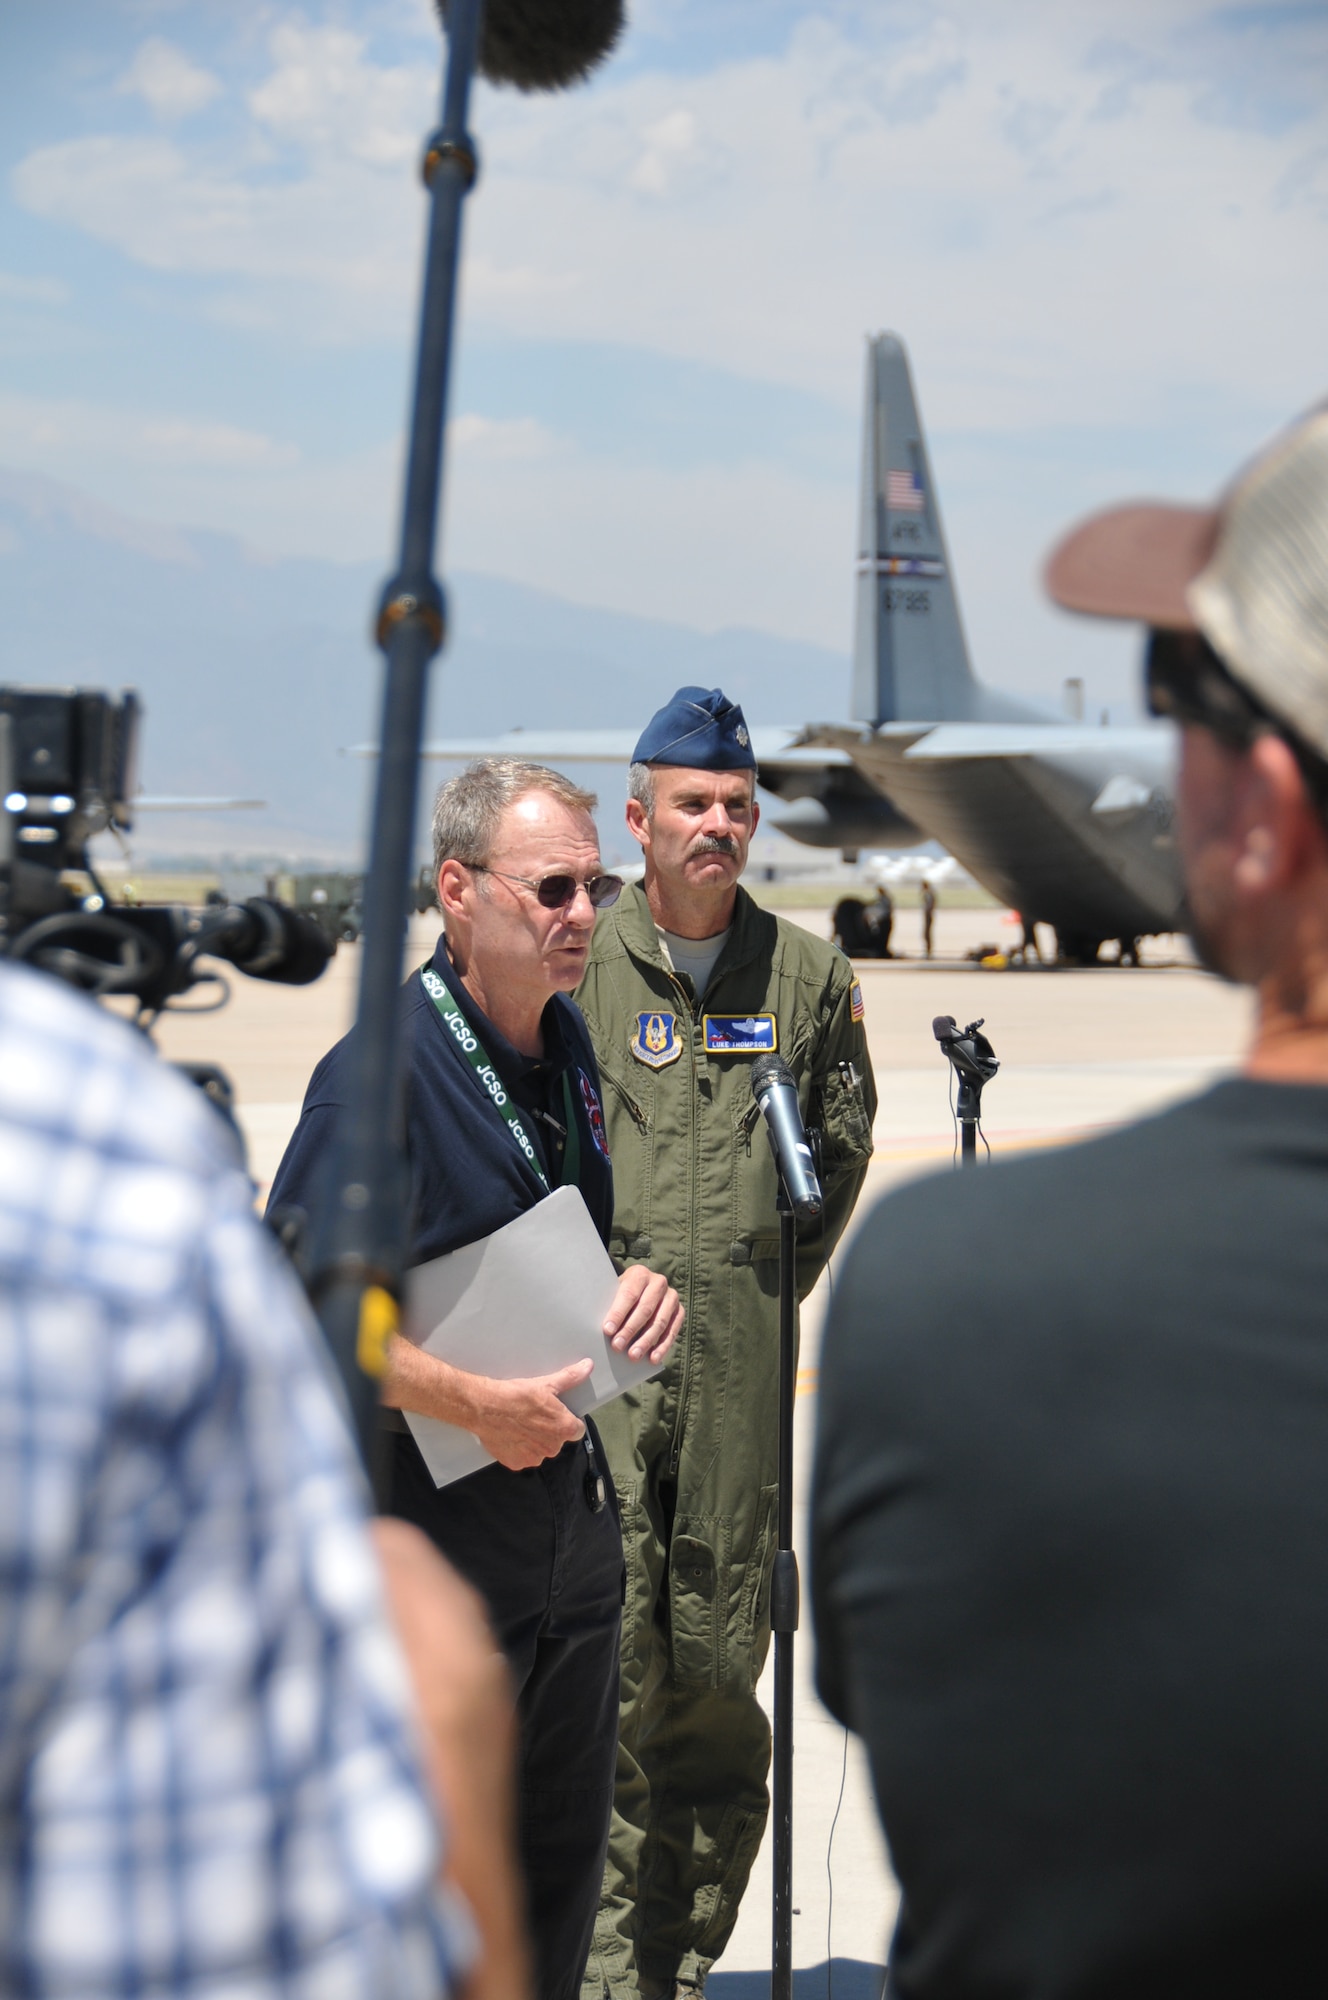 Lt. Col. Luke Thompson, 302nd Airlift Wing chief of aerial firefighting, and Jerry McCann, spokesman for the Rocky Mountain Area Coordination Center, speak with members of the media on the flightline at Peterson Air Force Base, Colo., June 25, 2012. Thompson and McCann addressed questions regarding the activation of the Department of Defense's Modular Airborne Firefighting System capability. (U.S. Air Force photo/Airman 1st Class Nichole Grady)